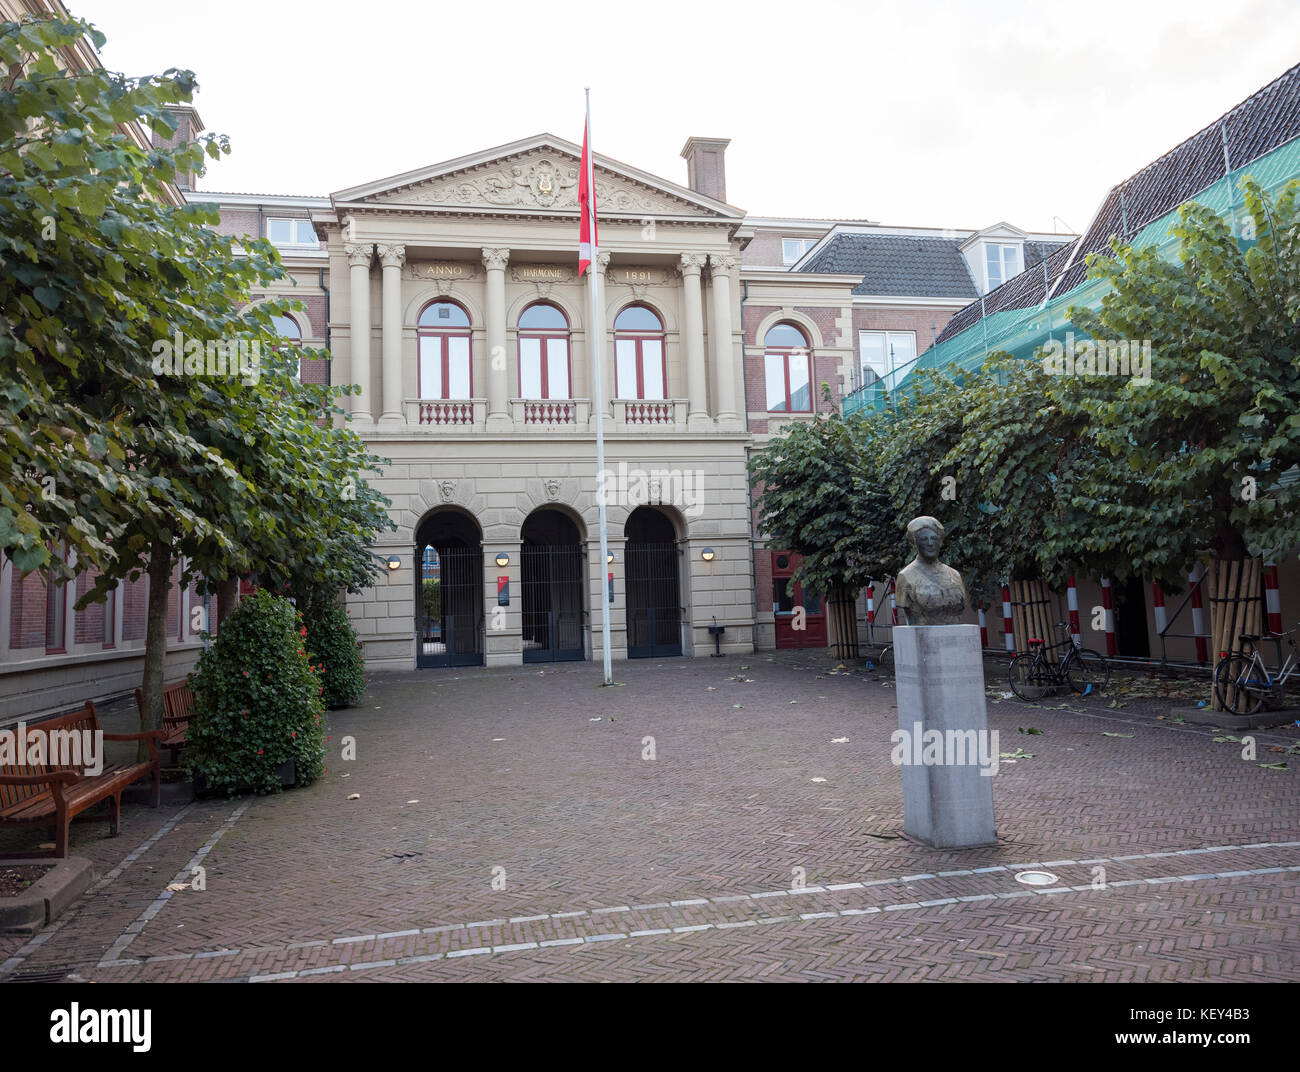 statue of aletta jacobs at entrance to university in dutch town of groningen Stock Photo